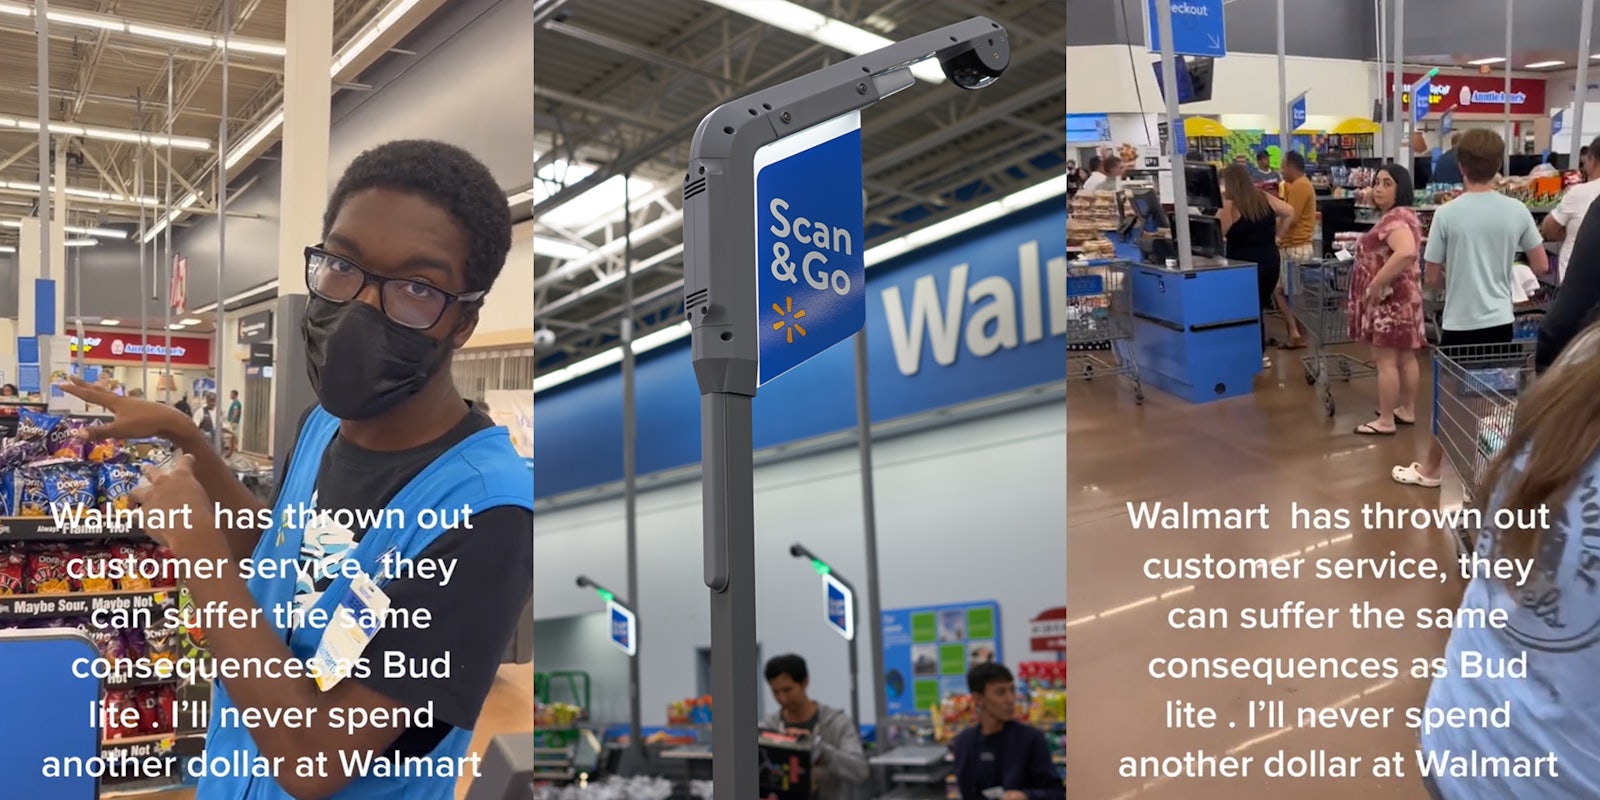 Walmart employee speaking with caption 'Walmart has thrown out customer service, they can suffer the same consequences as Bud lite. I'll never spend another dollar at Walmart' (l) Walmart self checkout sign (c) Walmart customers lined up at self checkout area with caption 'Walmart has thrown out customer service, they can suffer the same consequences as Bud lite. I'll never spend another dollar at Walmart' (r)